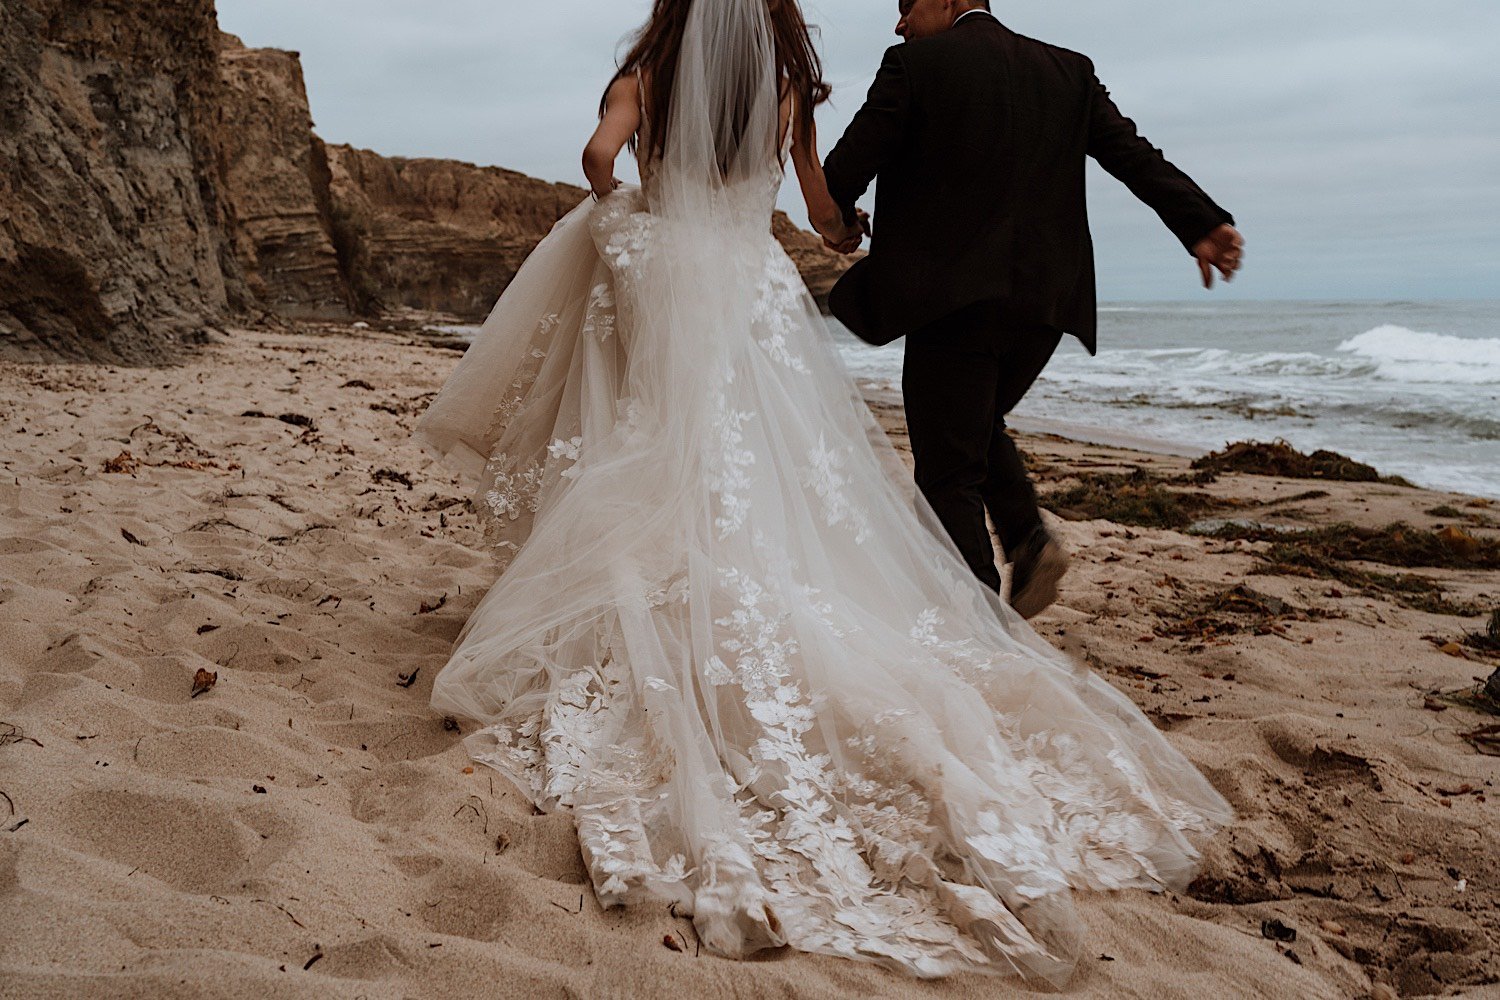 Bride and groom wearing wedding gear run on the beach in front of the water